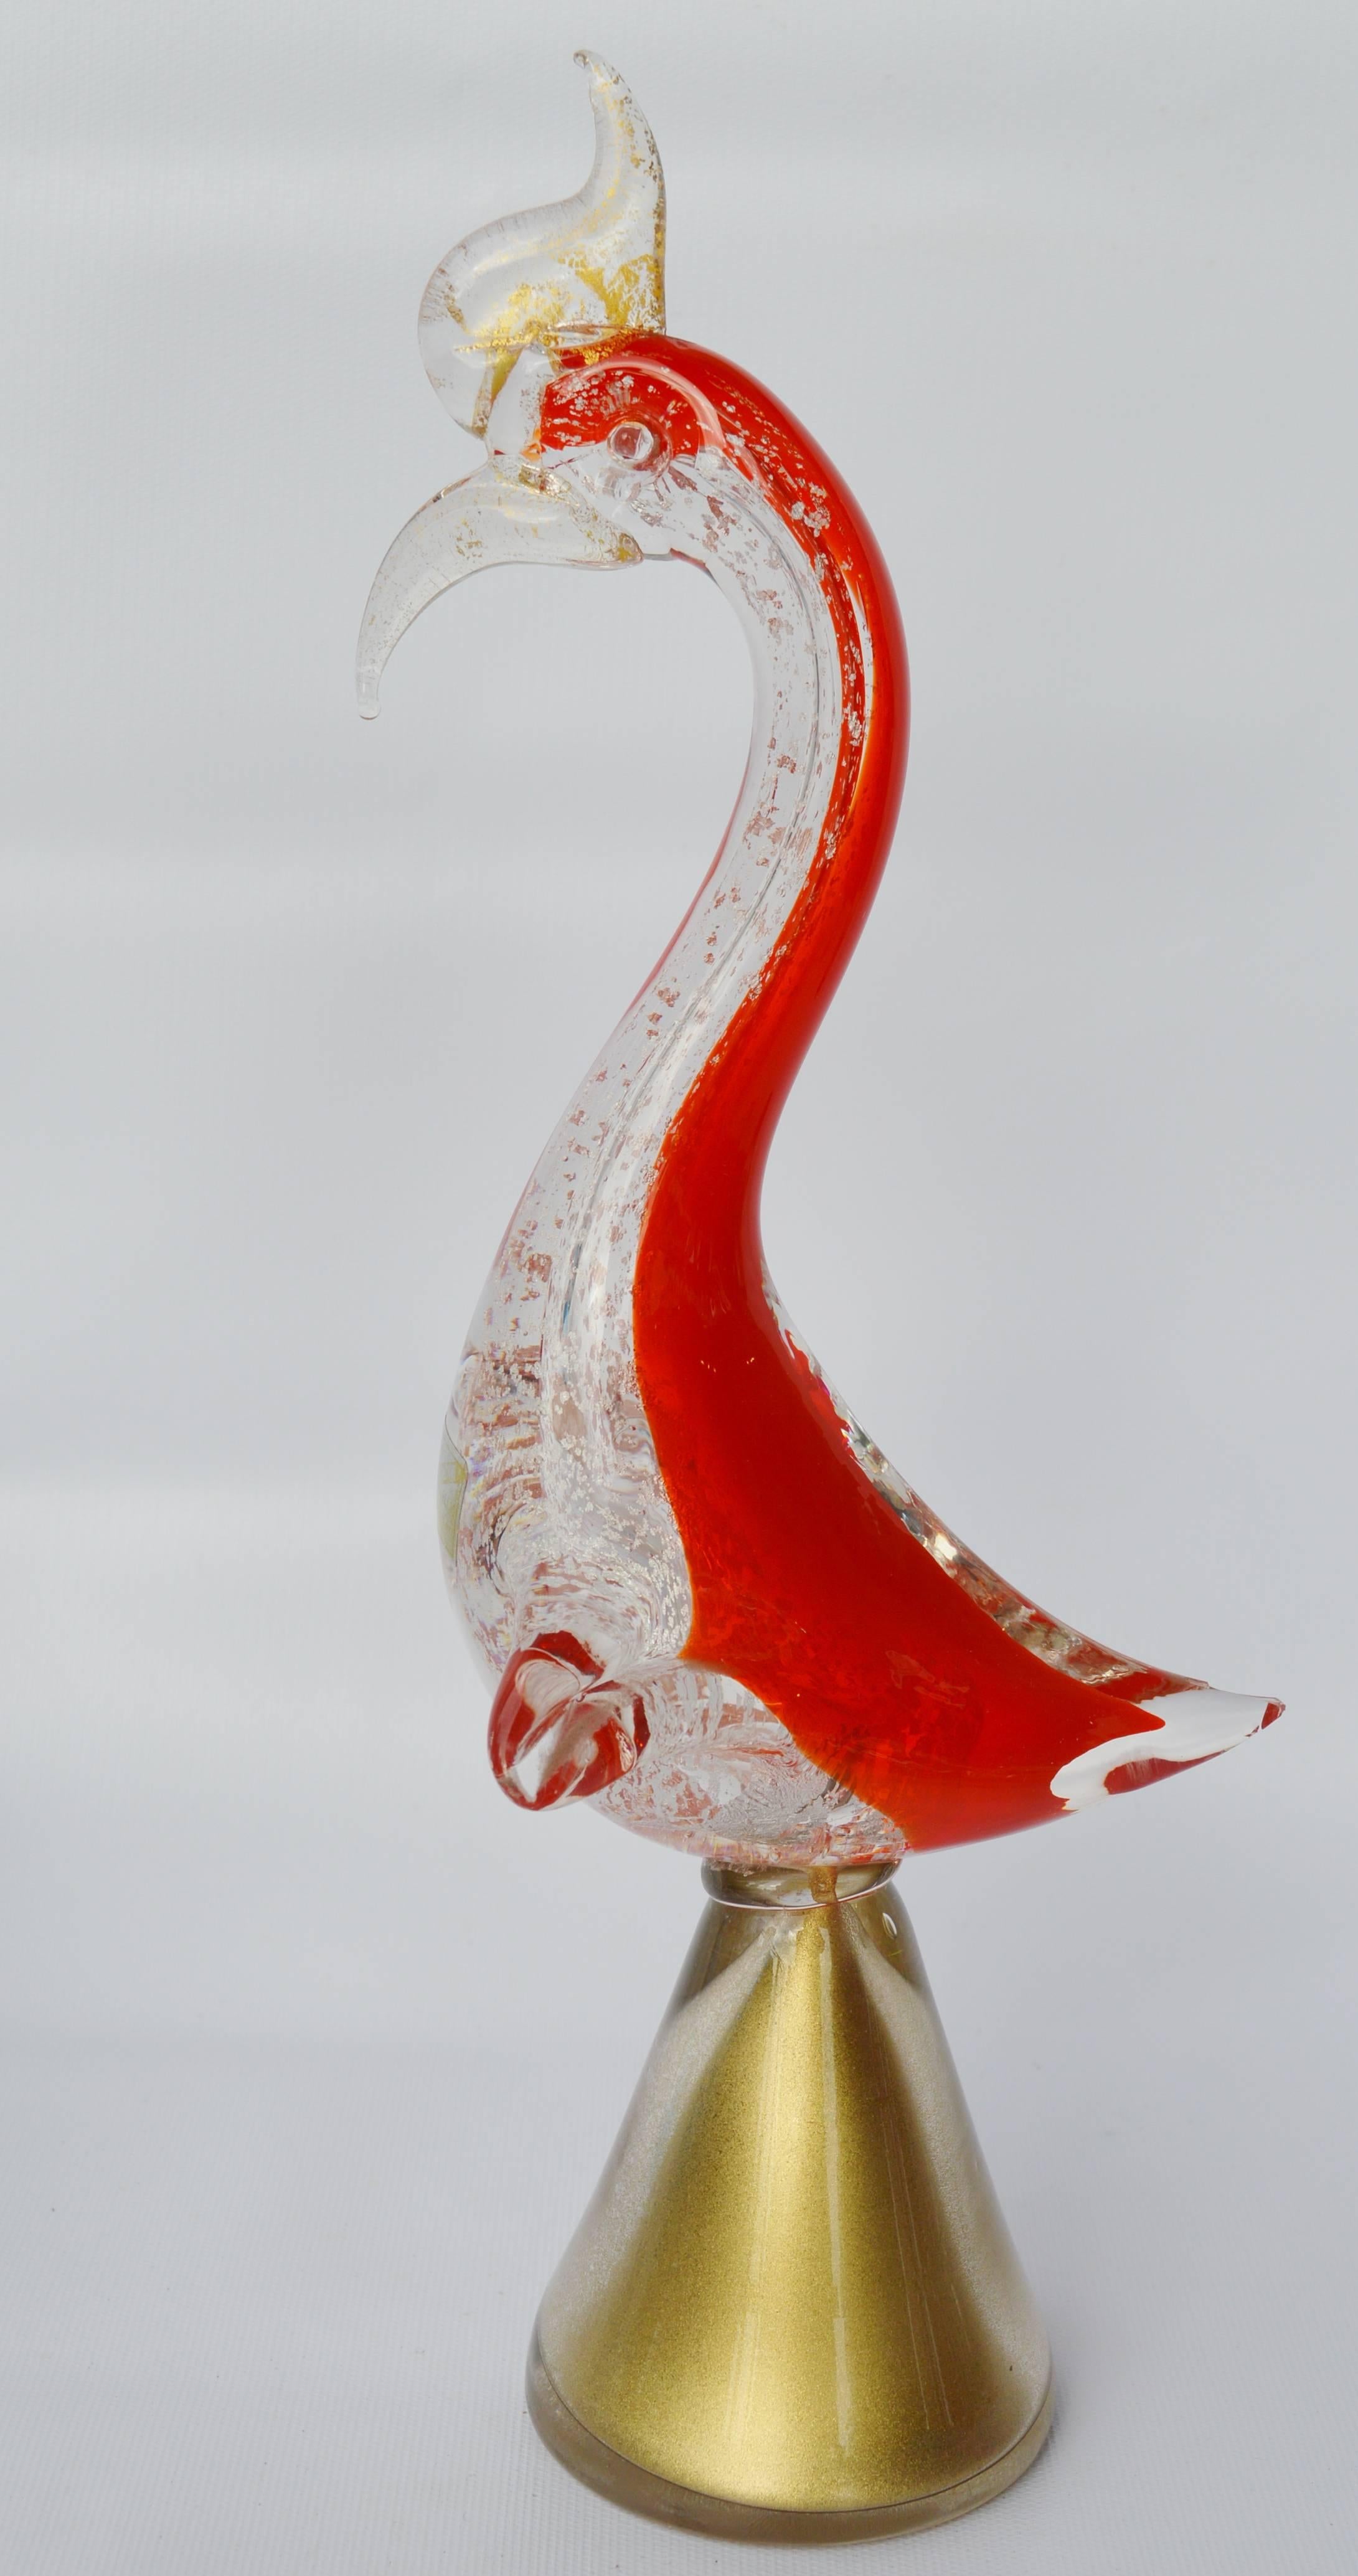 gumps murano glass rooster figurine